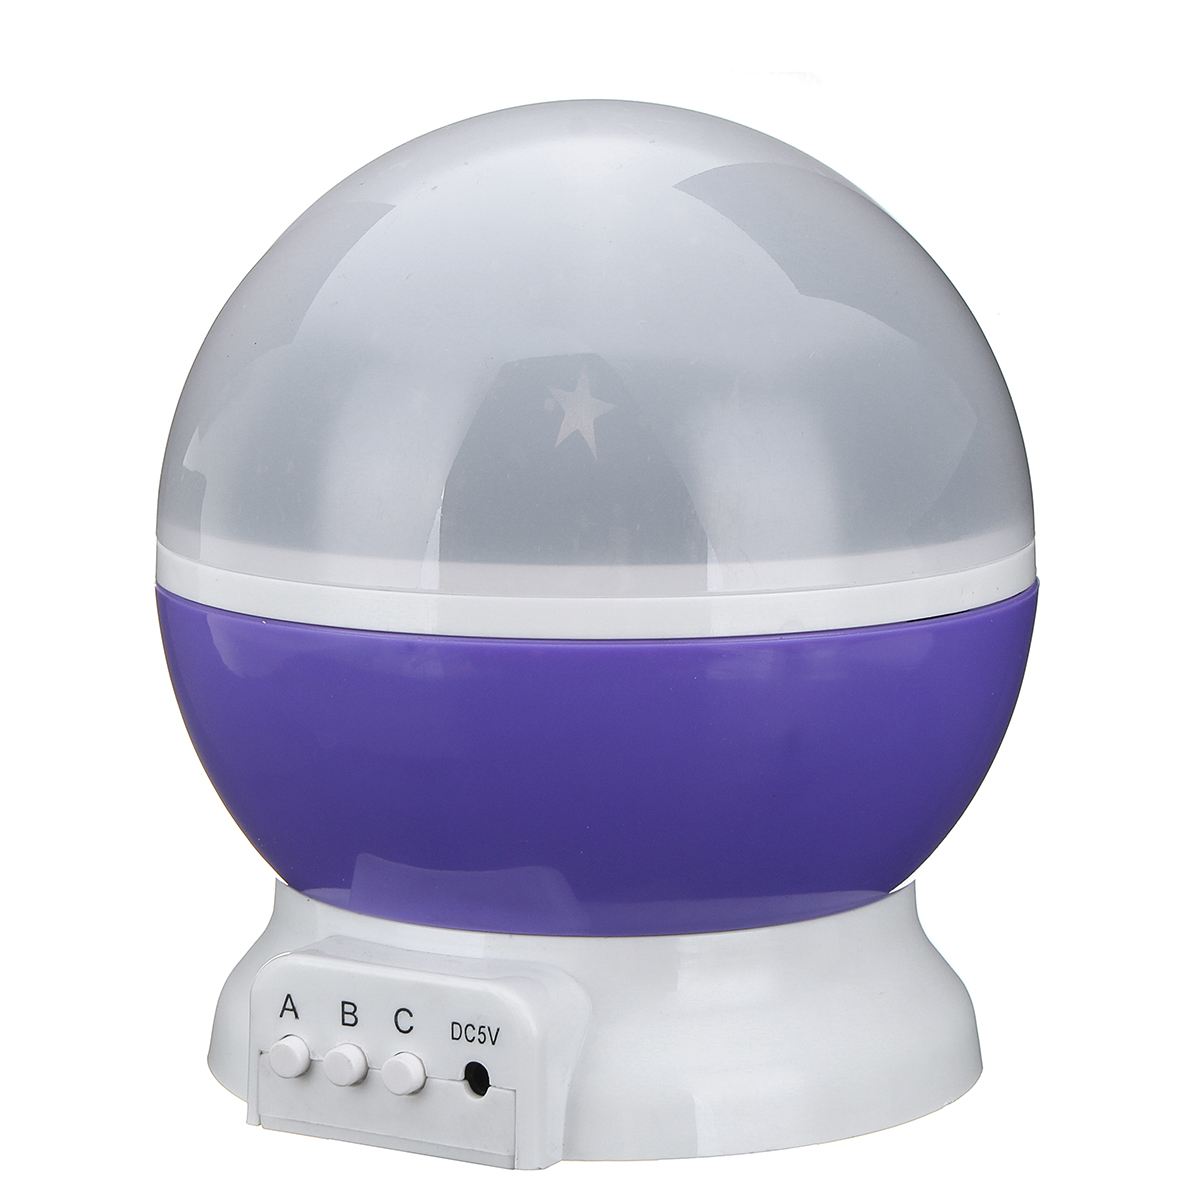 LED-Starry-Projector-Lamp-Baby-Night-Light-USB-Romantic-Rotating-Moon-Cosmos-Sky-Star-Projection-Lam-1937902-11